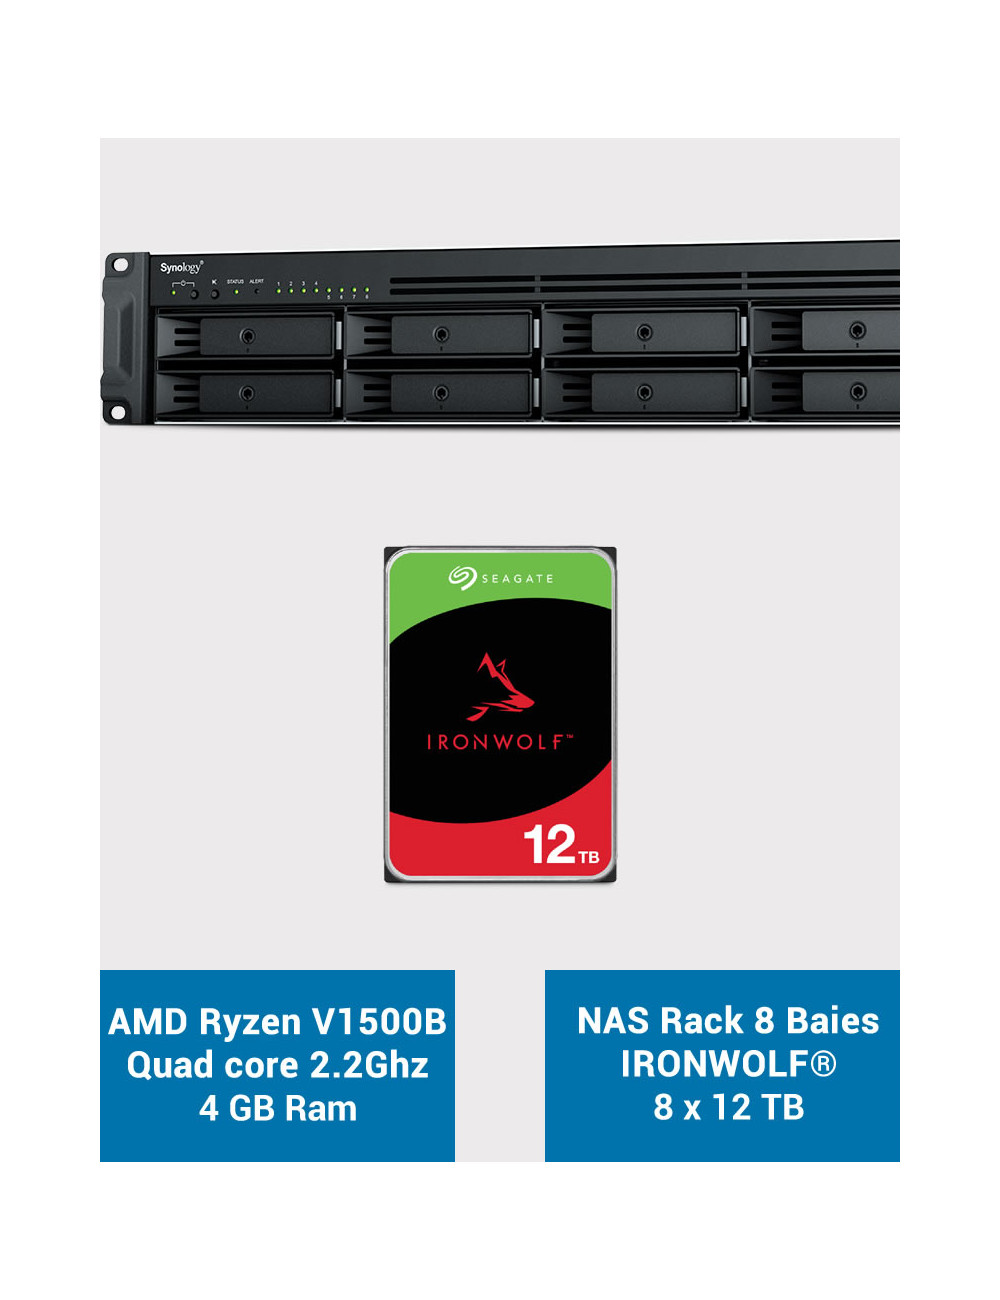 Synology RS1221+ Serveur NAS Rack IRONWOLF 96To (8x12To)